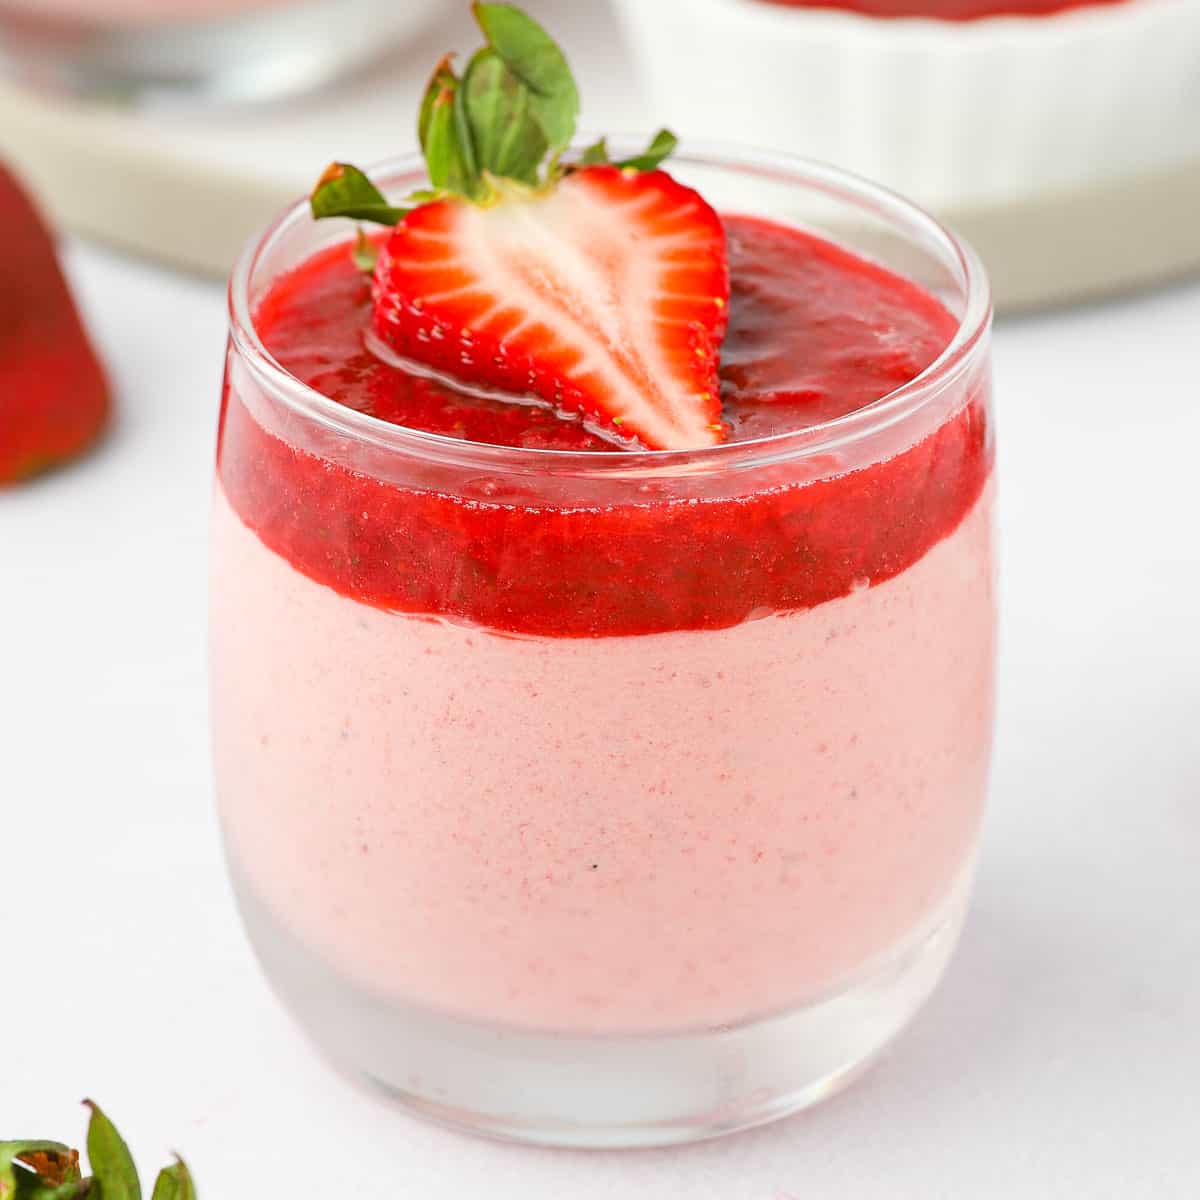 Close up on the strawberry mousse in a glass topped with strawberry compote and half a strawberry.